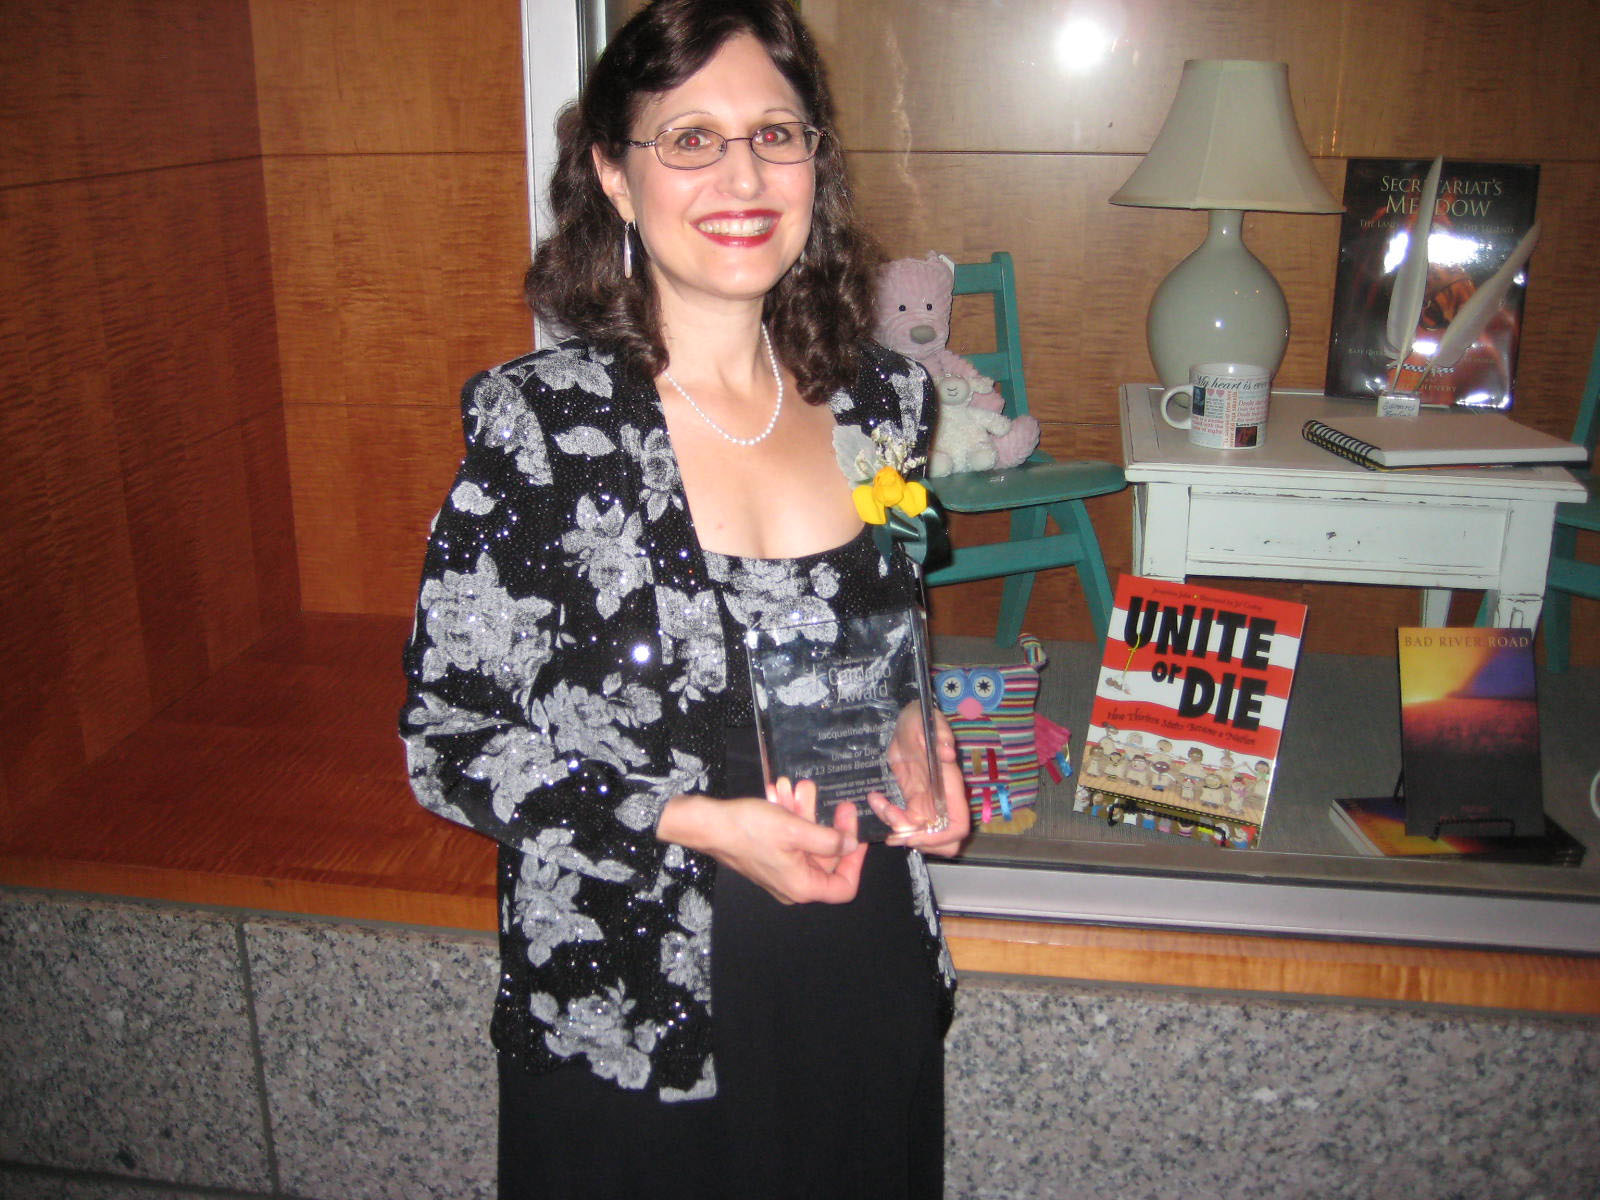 Jacqueline holding her engraved crystal book in front of a display with Unite or Die: How Thirteen States Became a Nation